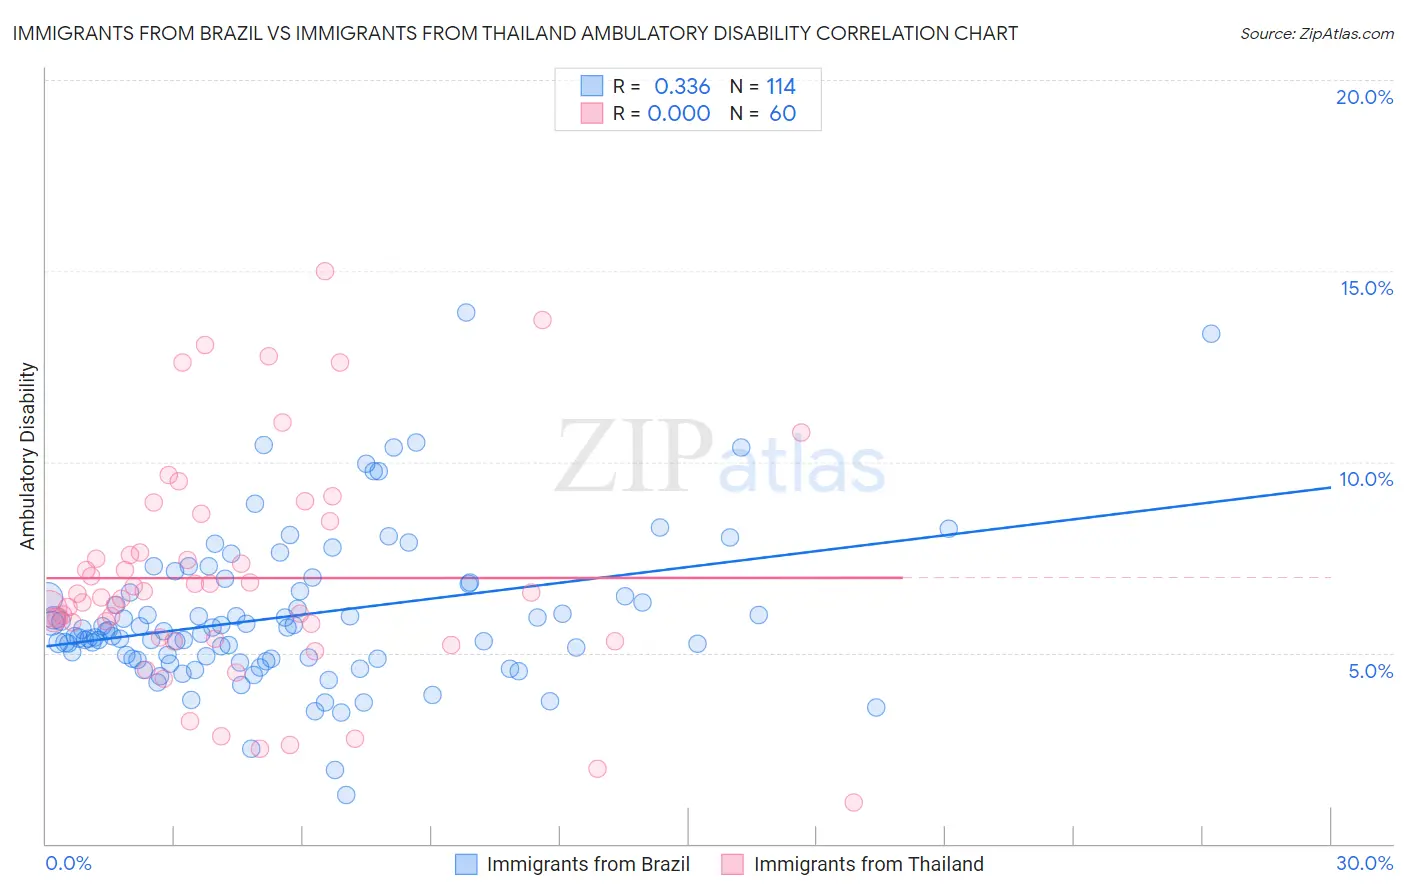 Immigrants from Brazil vs Immigrants from Thailand Ambulatory Disability